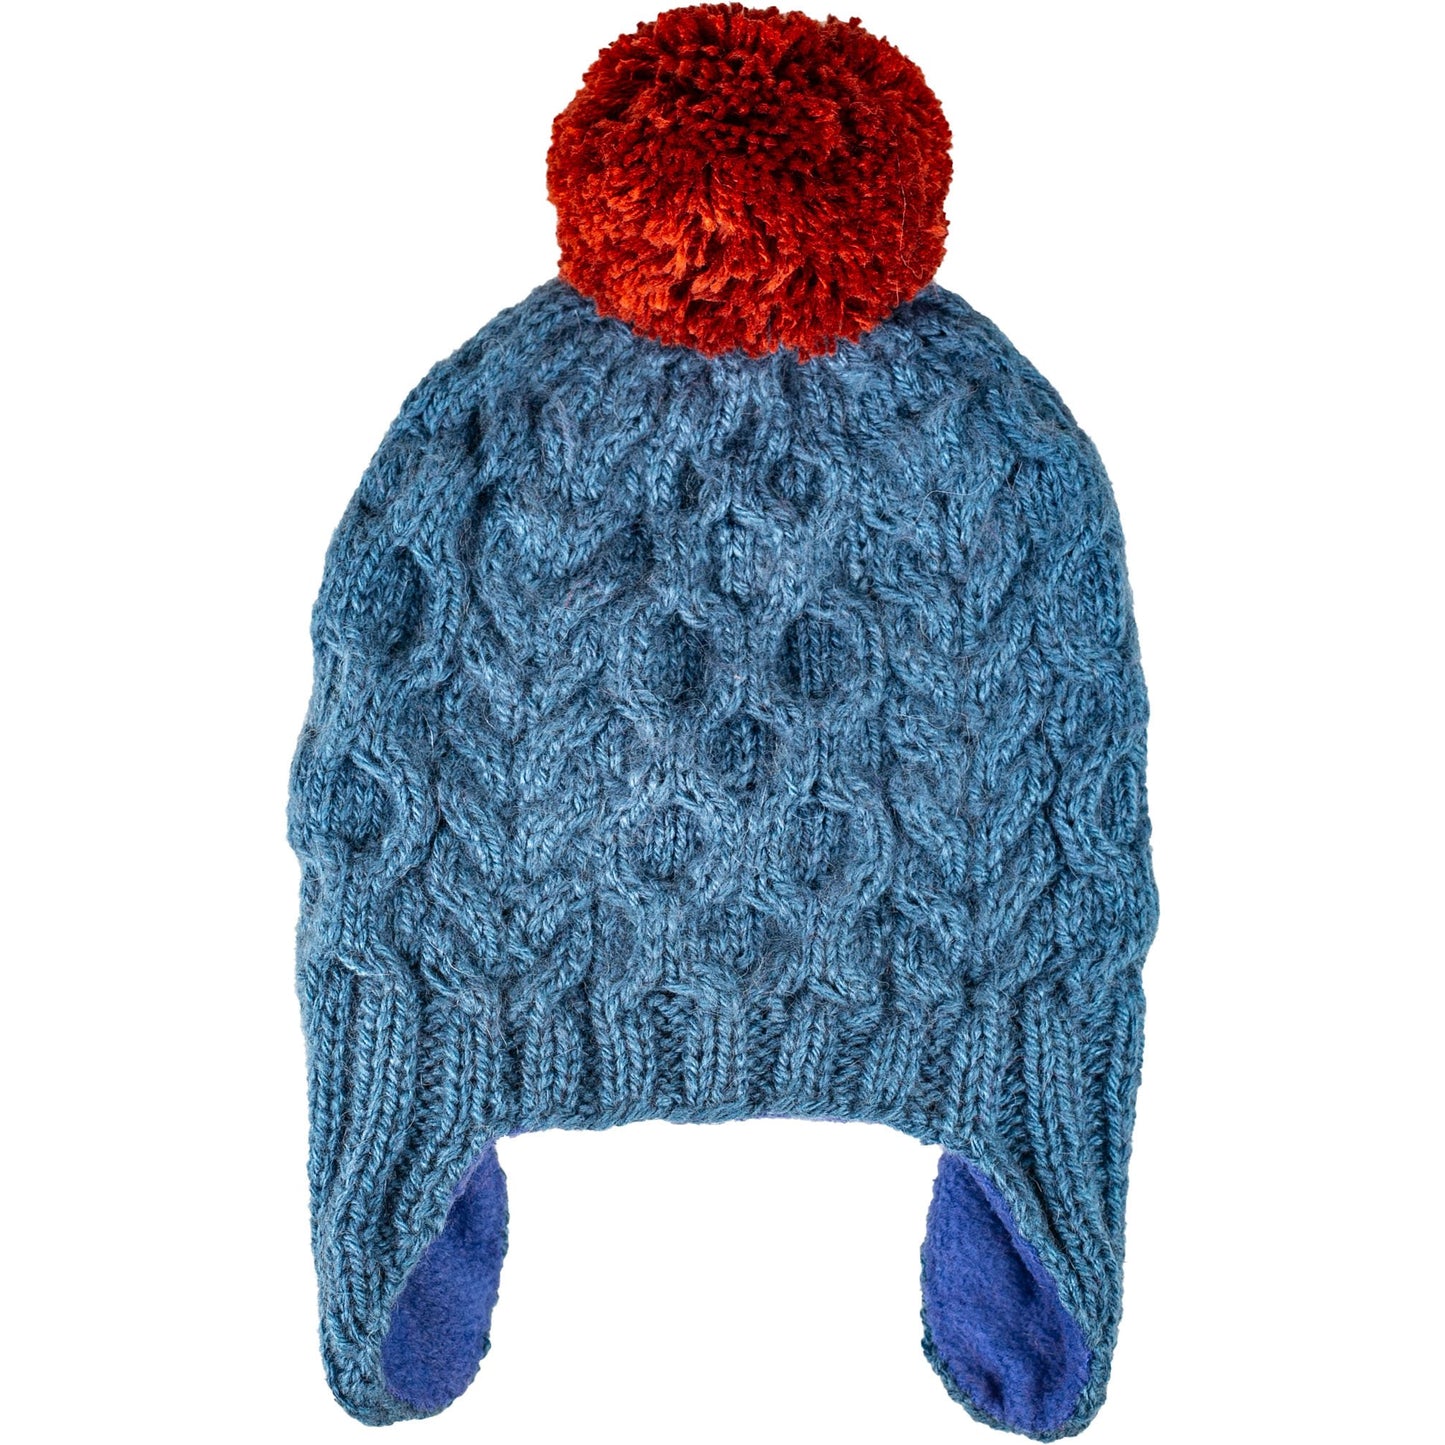 Blue Cable Hat with Red Pompom